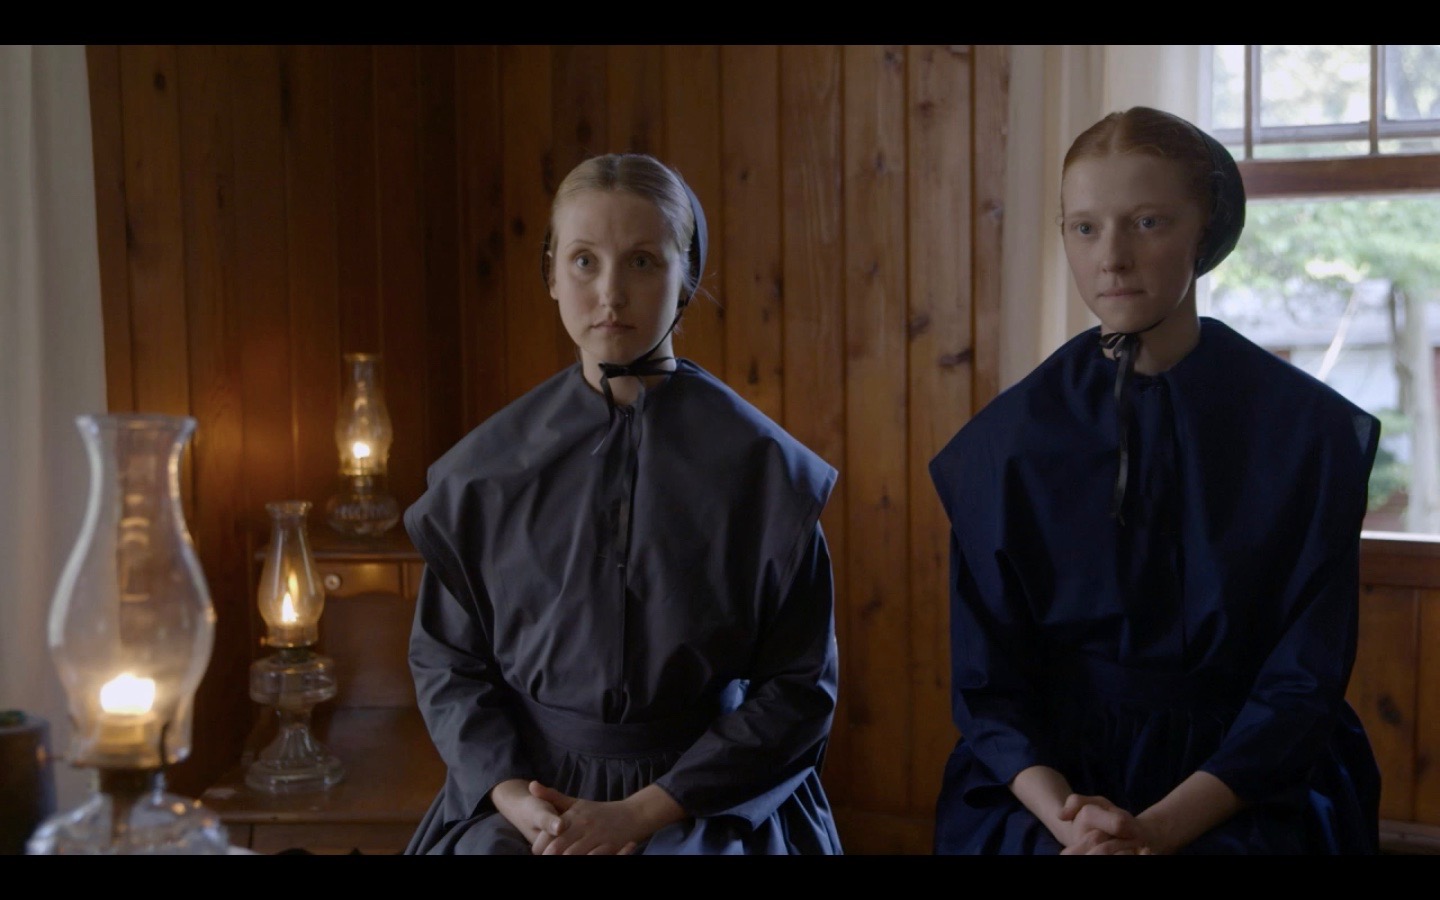 Watch Amish Witches: The True Story of Holmes County